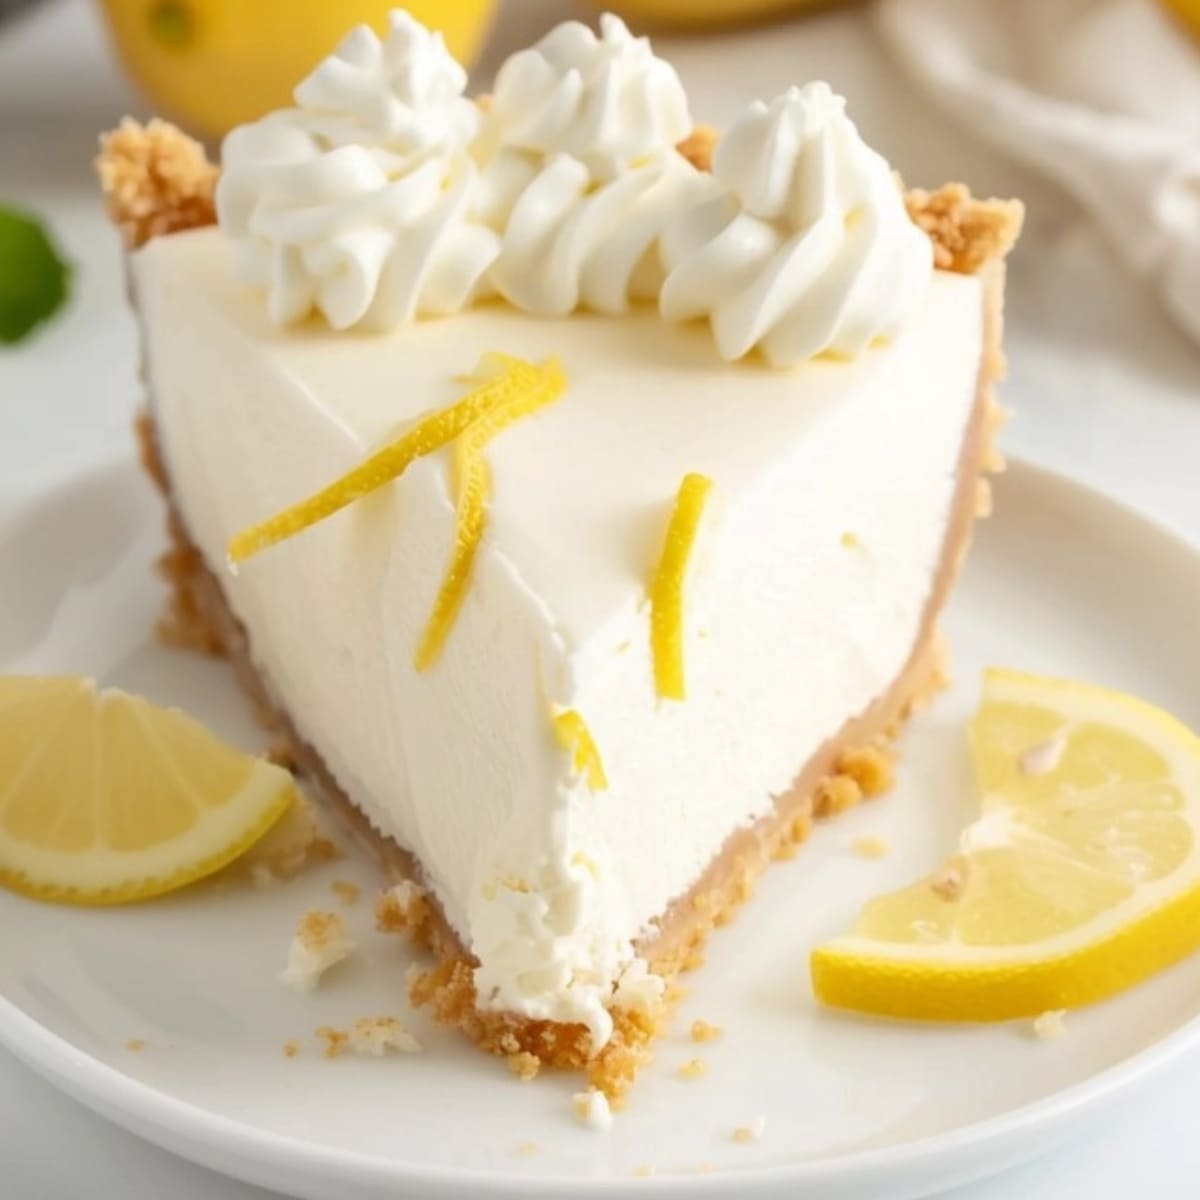 Slice of Cream Cheese Lemonade Pie garnished with lemon slice served on a white plate.